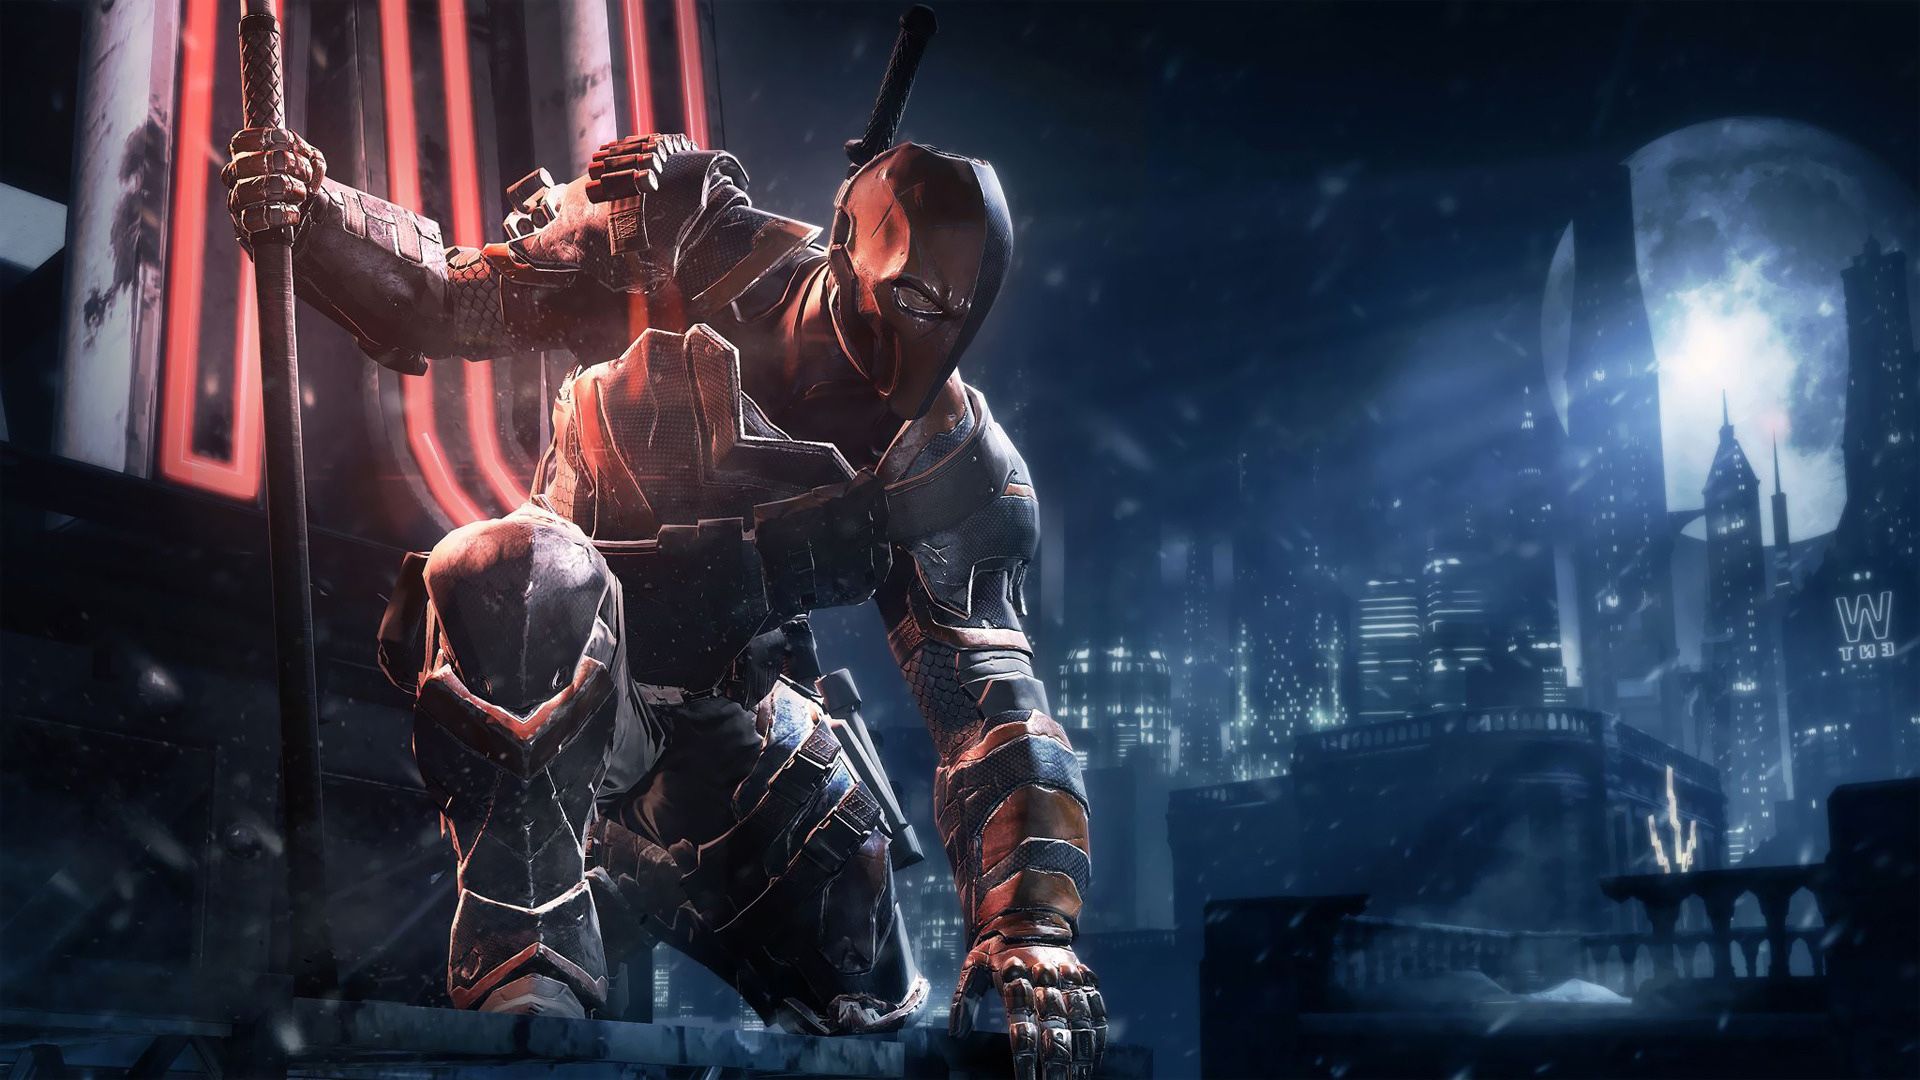 Deathstroke Batman Arkham Origins HD Games Wallpapers for Mobile and